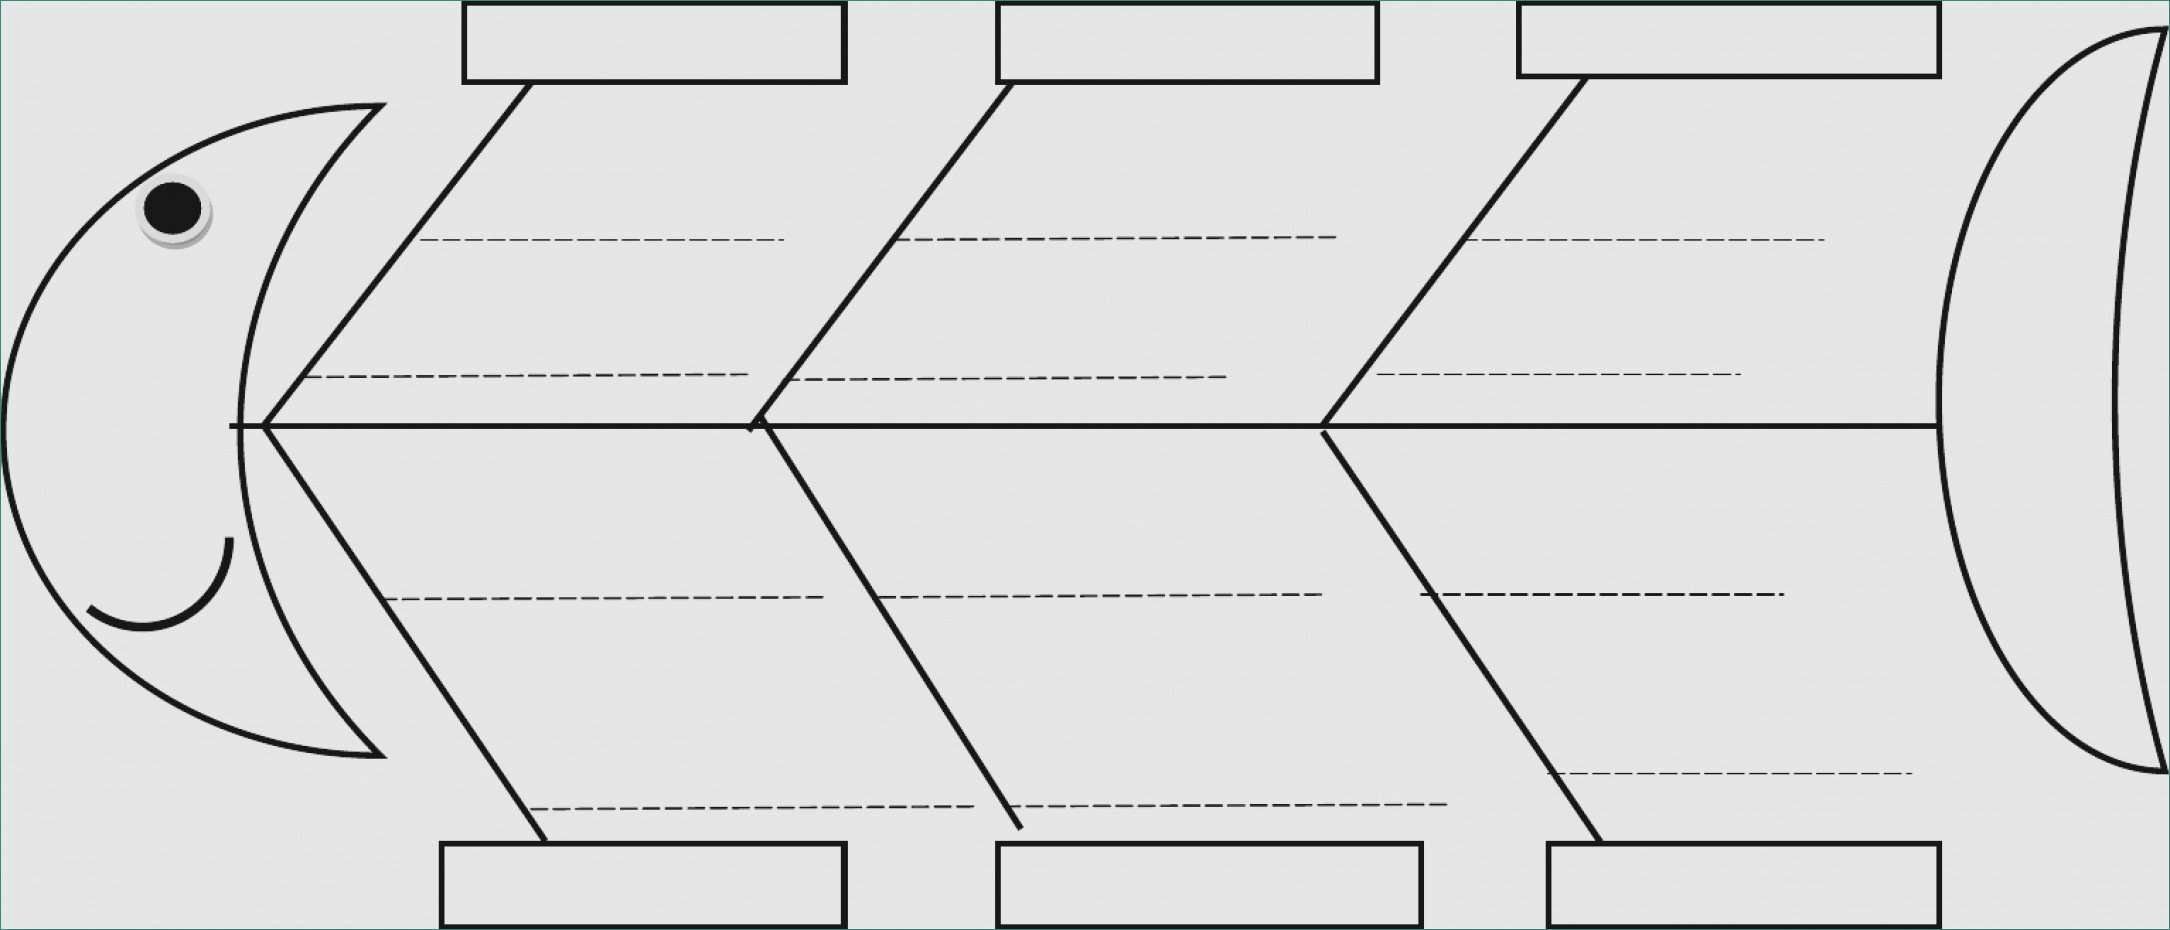 Blank Fishbone Diagram Template Inspirational Blank Cause and Effect Diagram